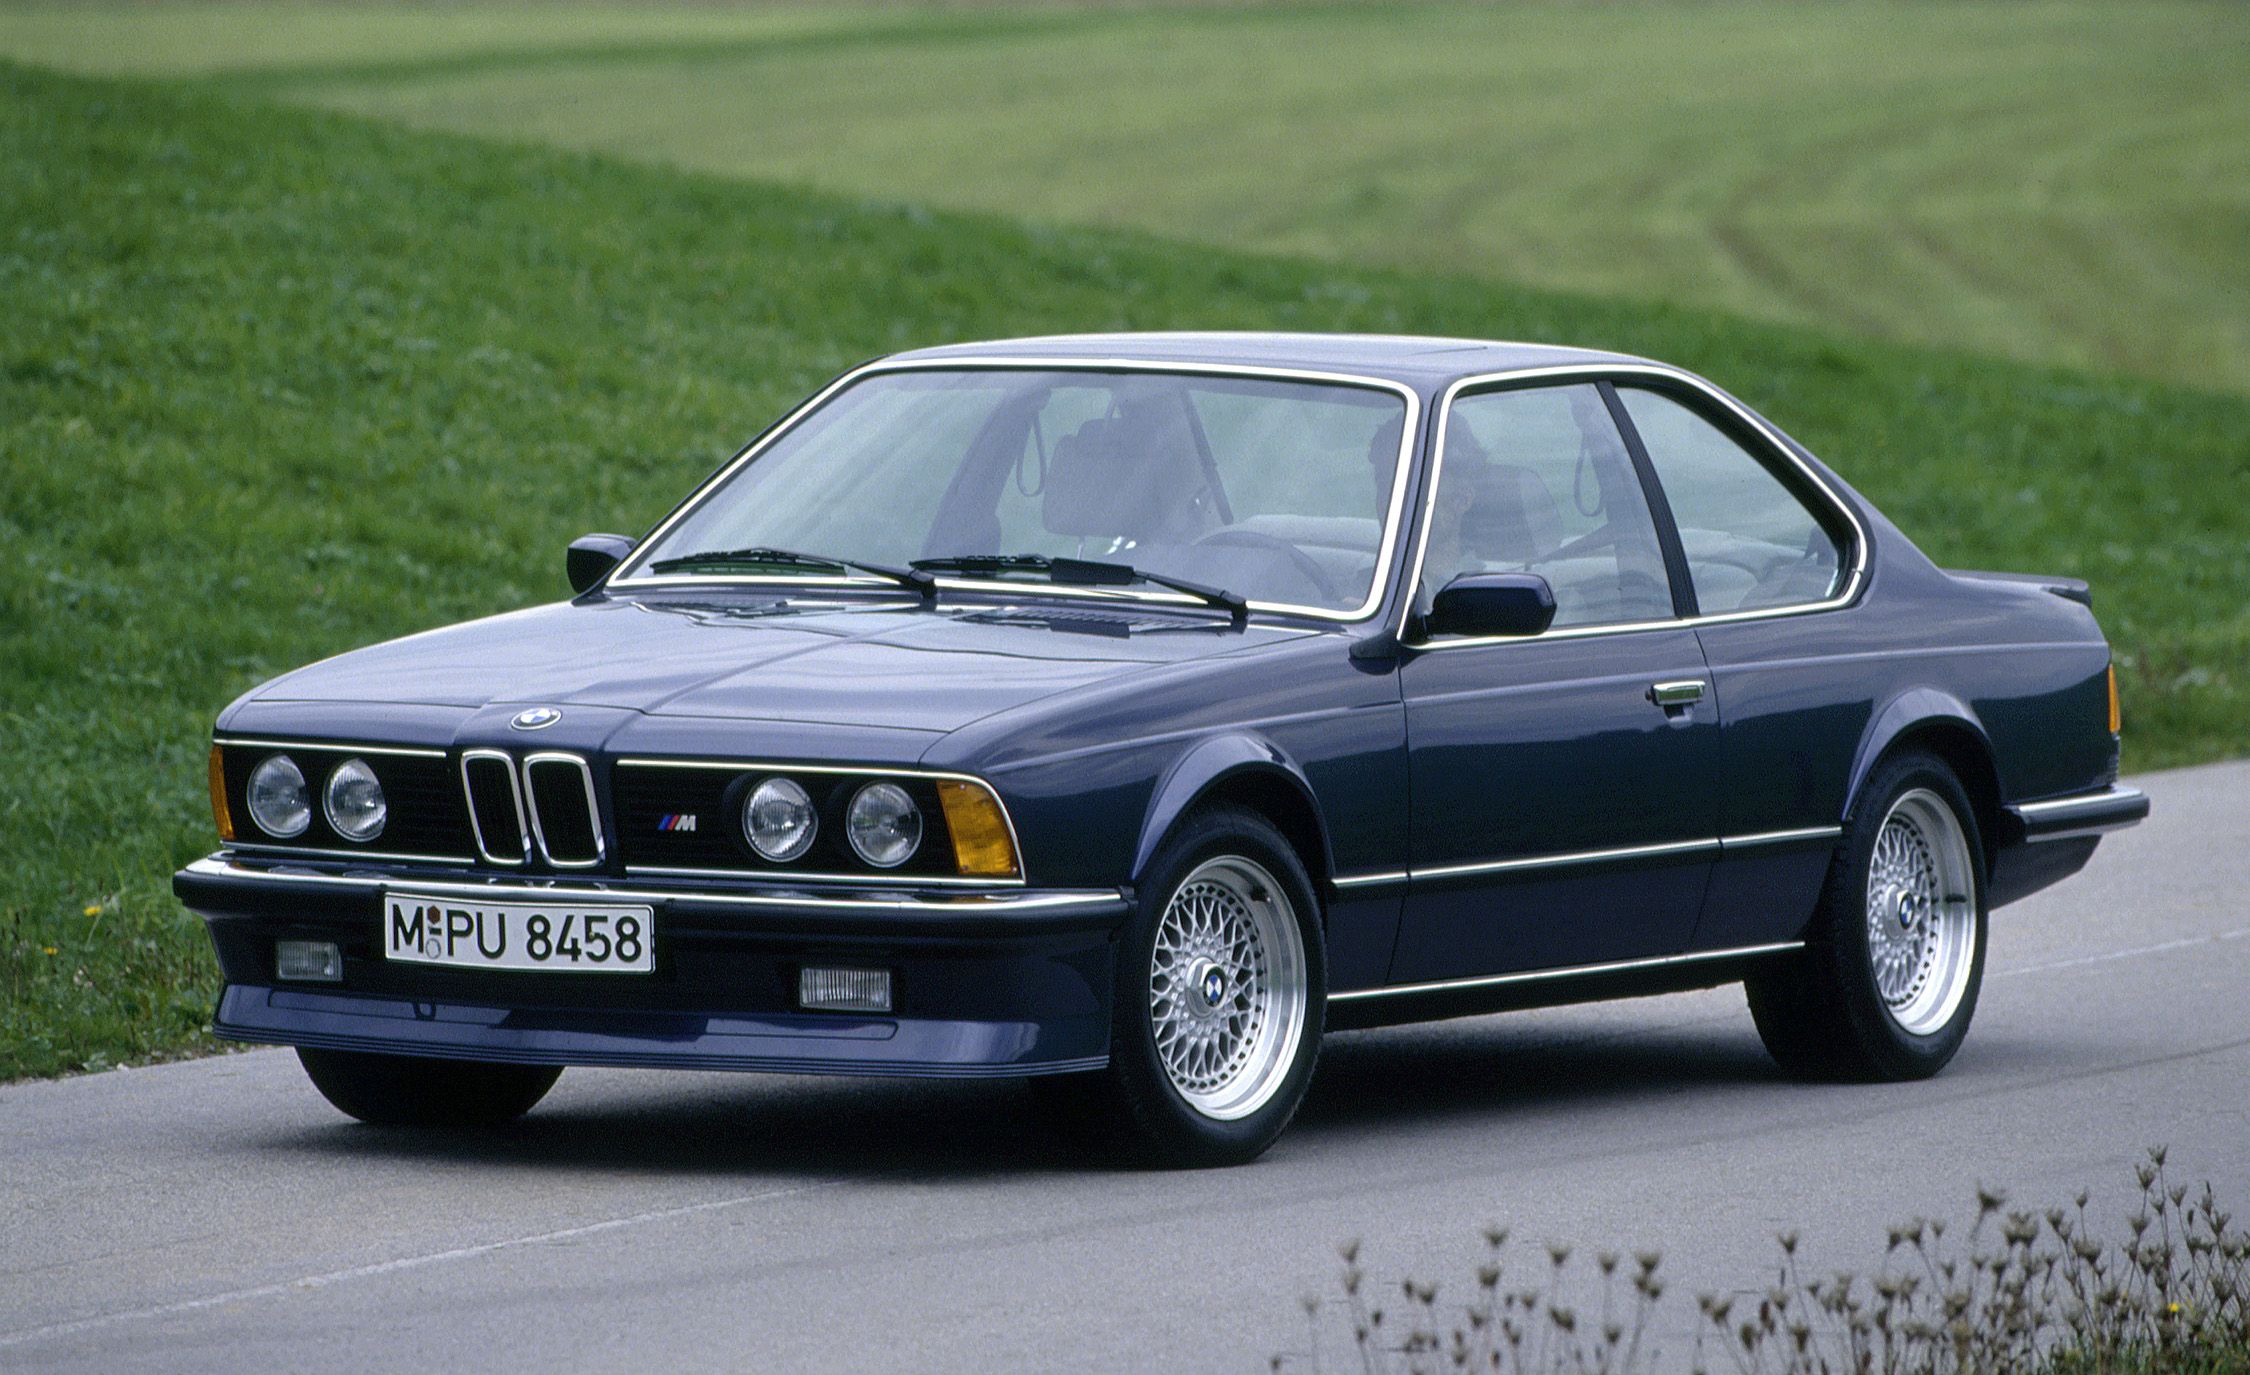 Best Road Cars Ever Developed by BMW's M Division